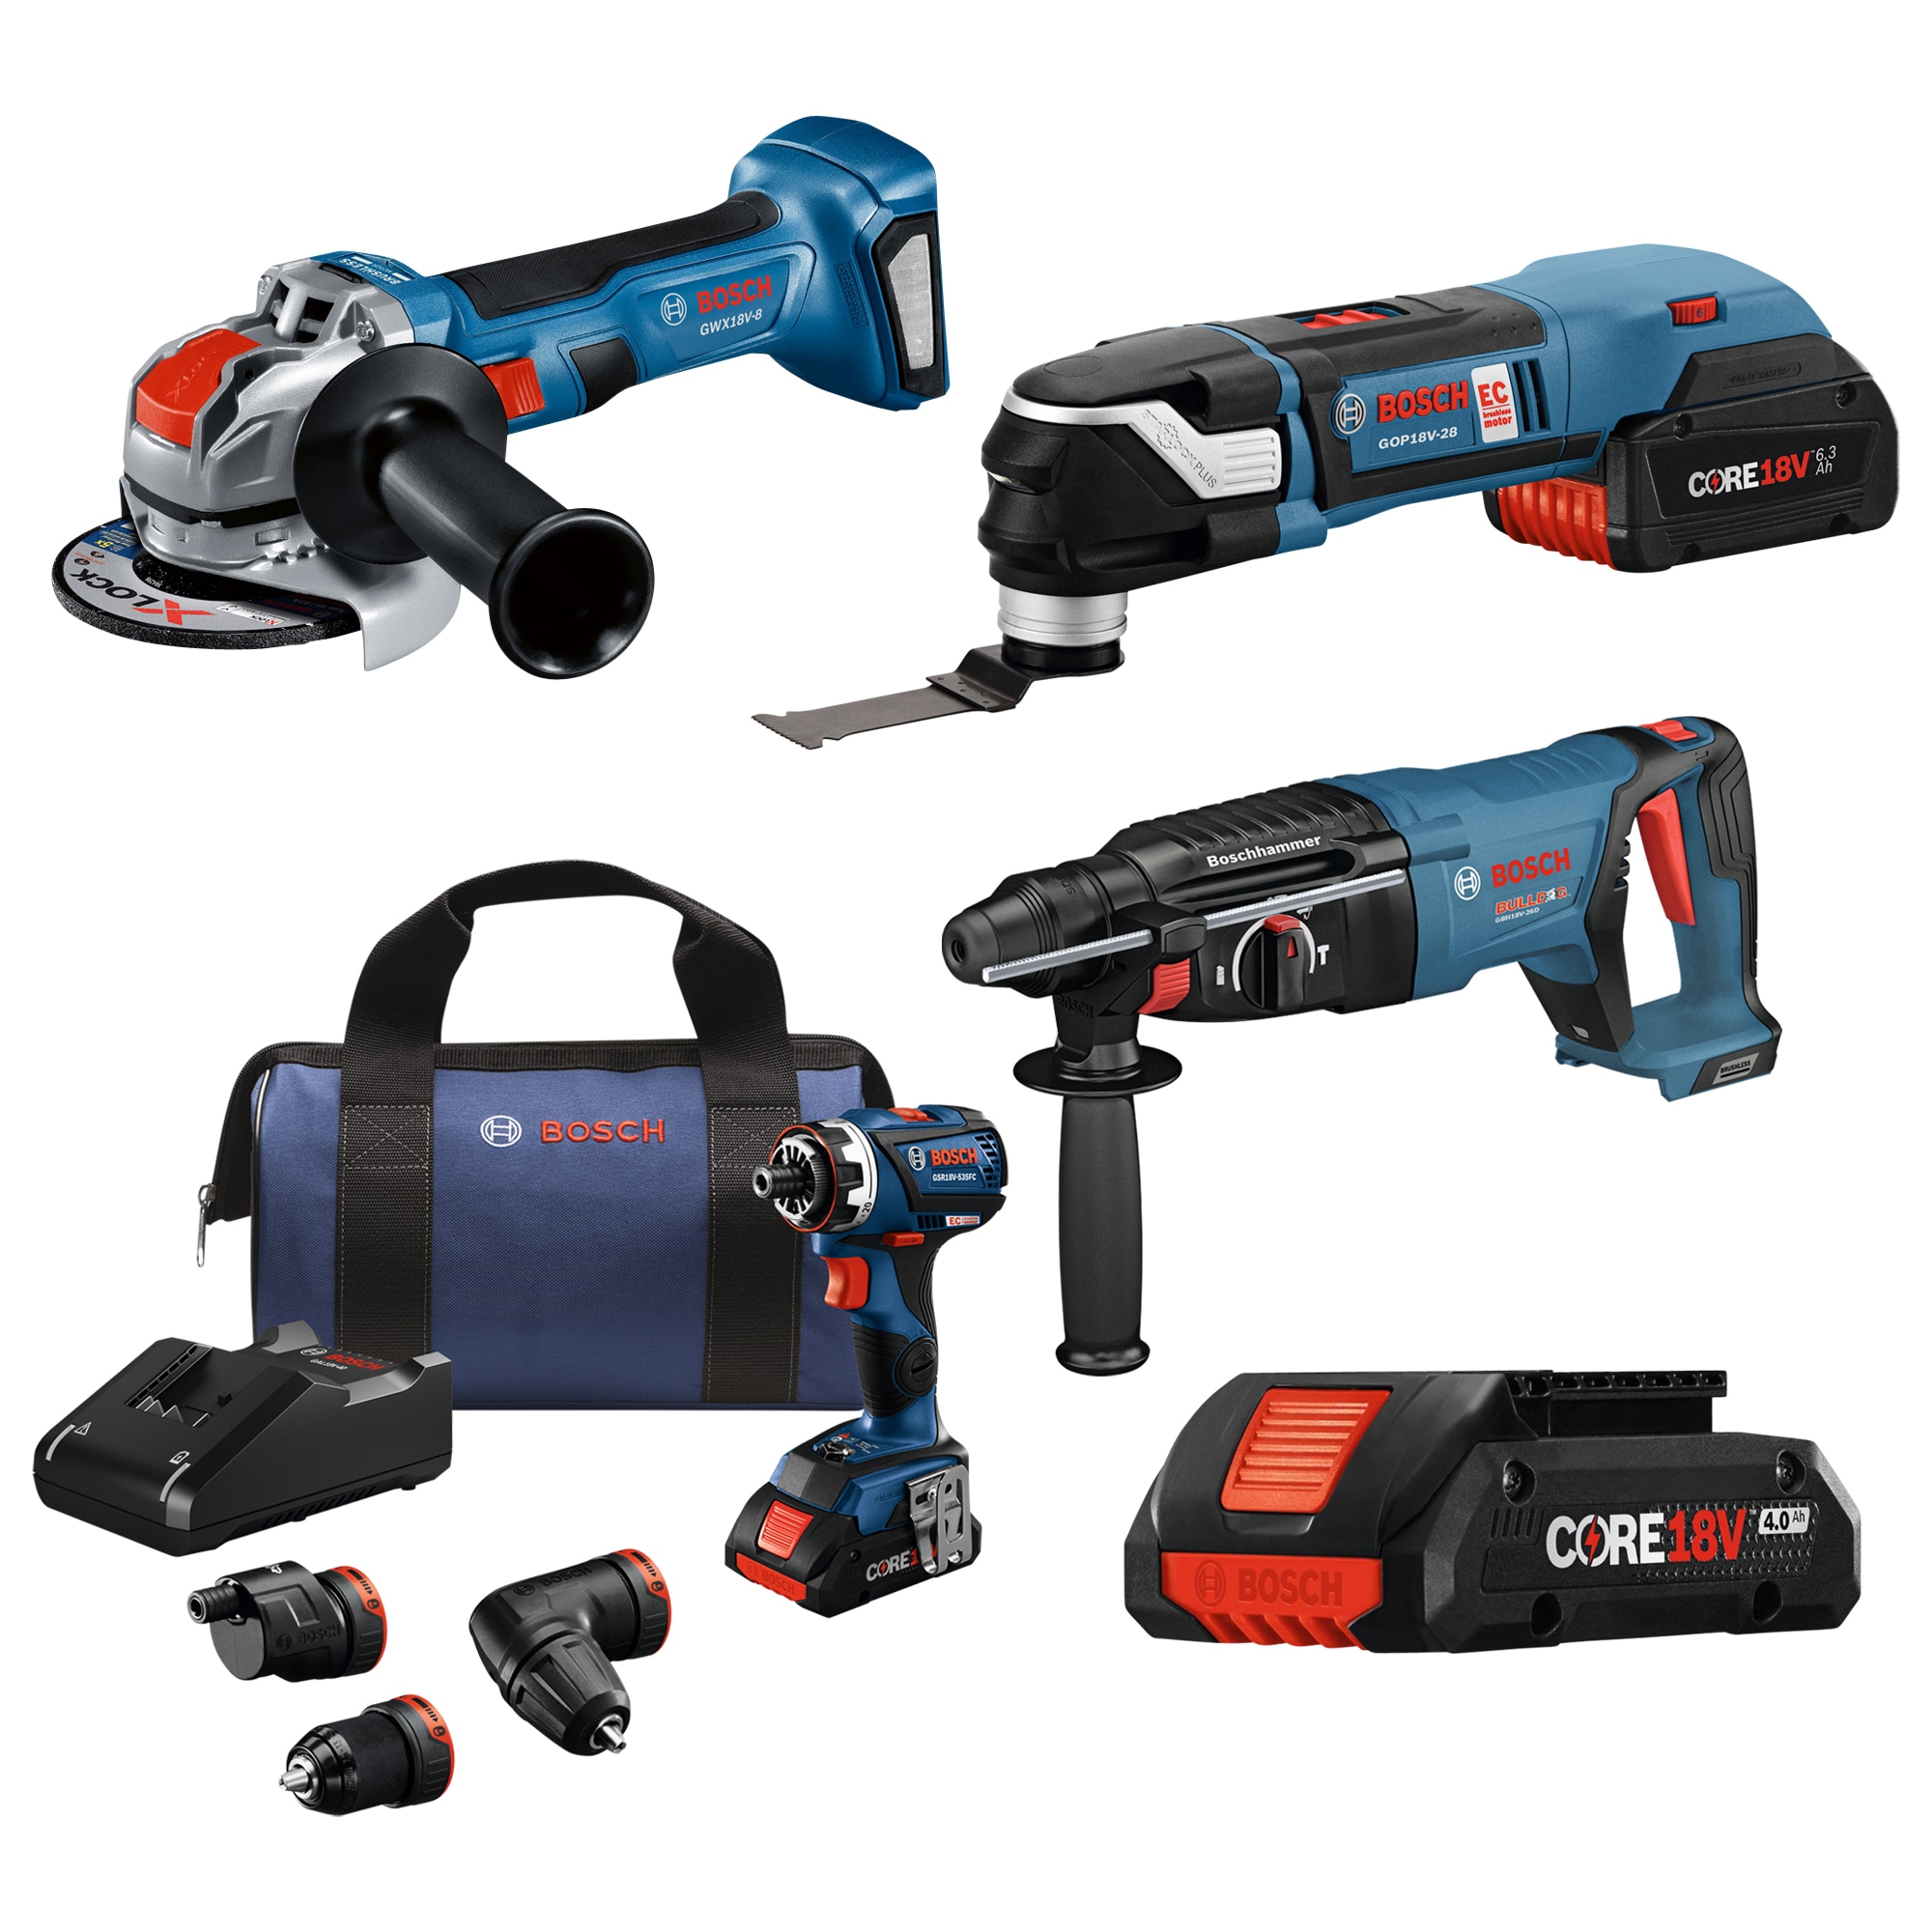 Smerig schaal uitvinden Shop Bosch 18V Brushless 5-Tool Kit w/ Chameleon 5-in-1 Drill Driver/  Starlock Oscillating Tool/ X-Lock Grinder/ Rotary Hammer/ 2x4.0ah Batteries  with Charger and Bag at Lowes.com